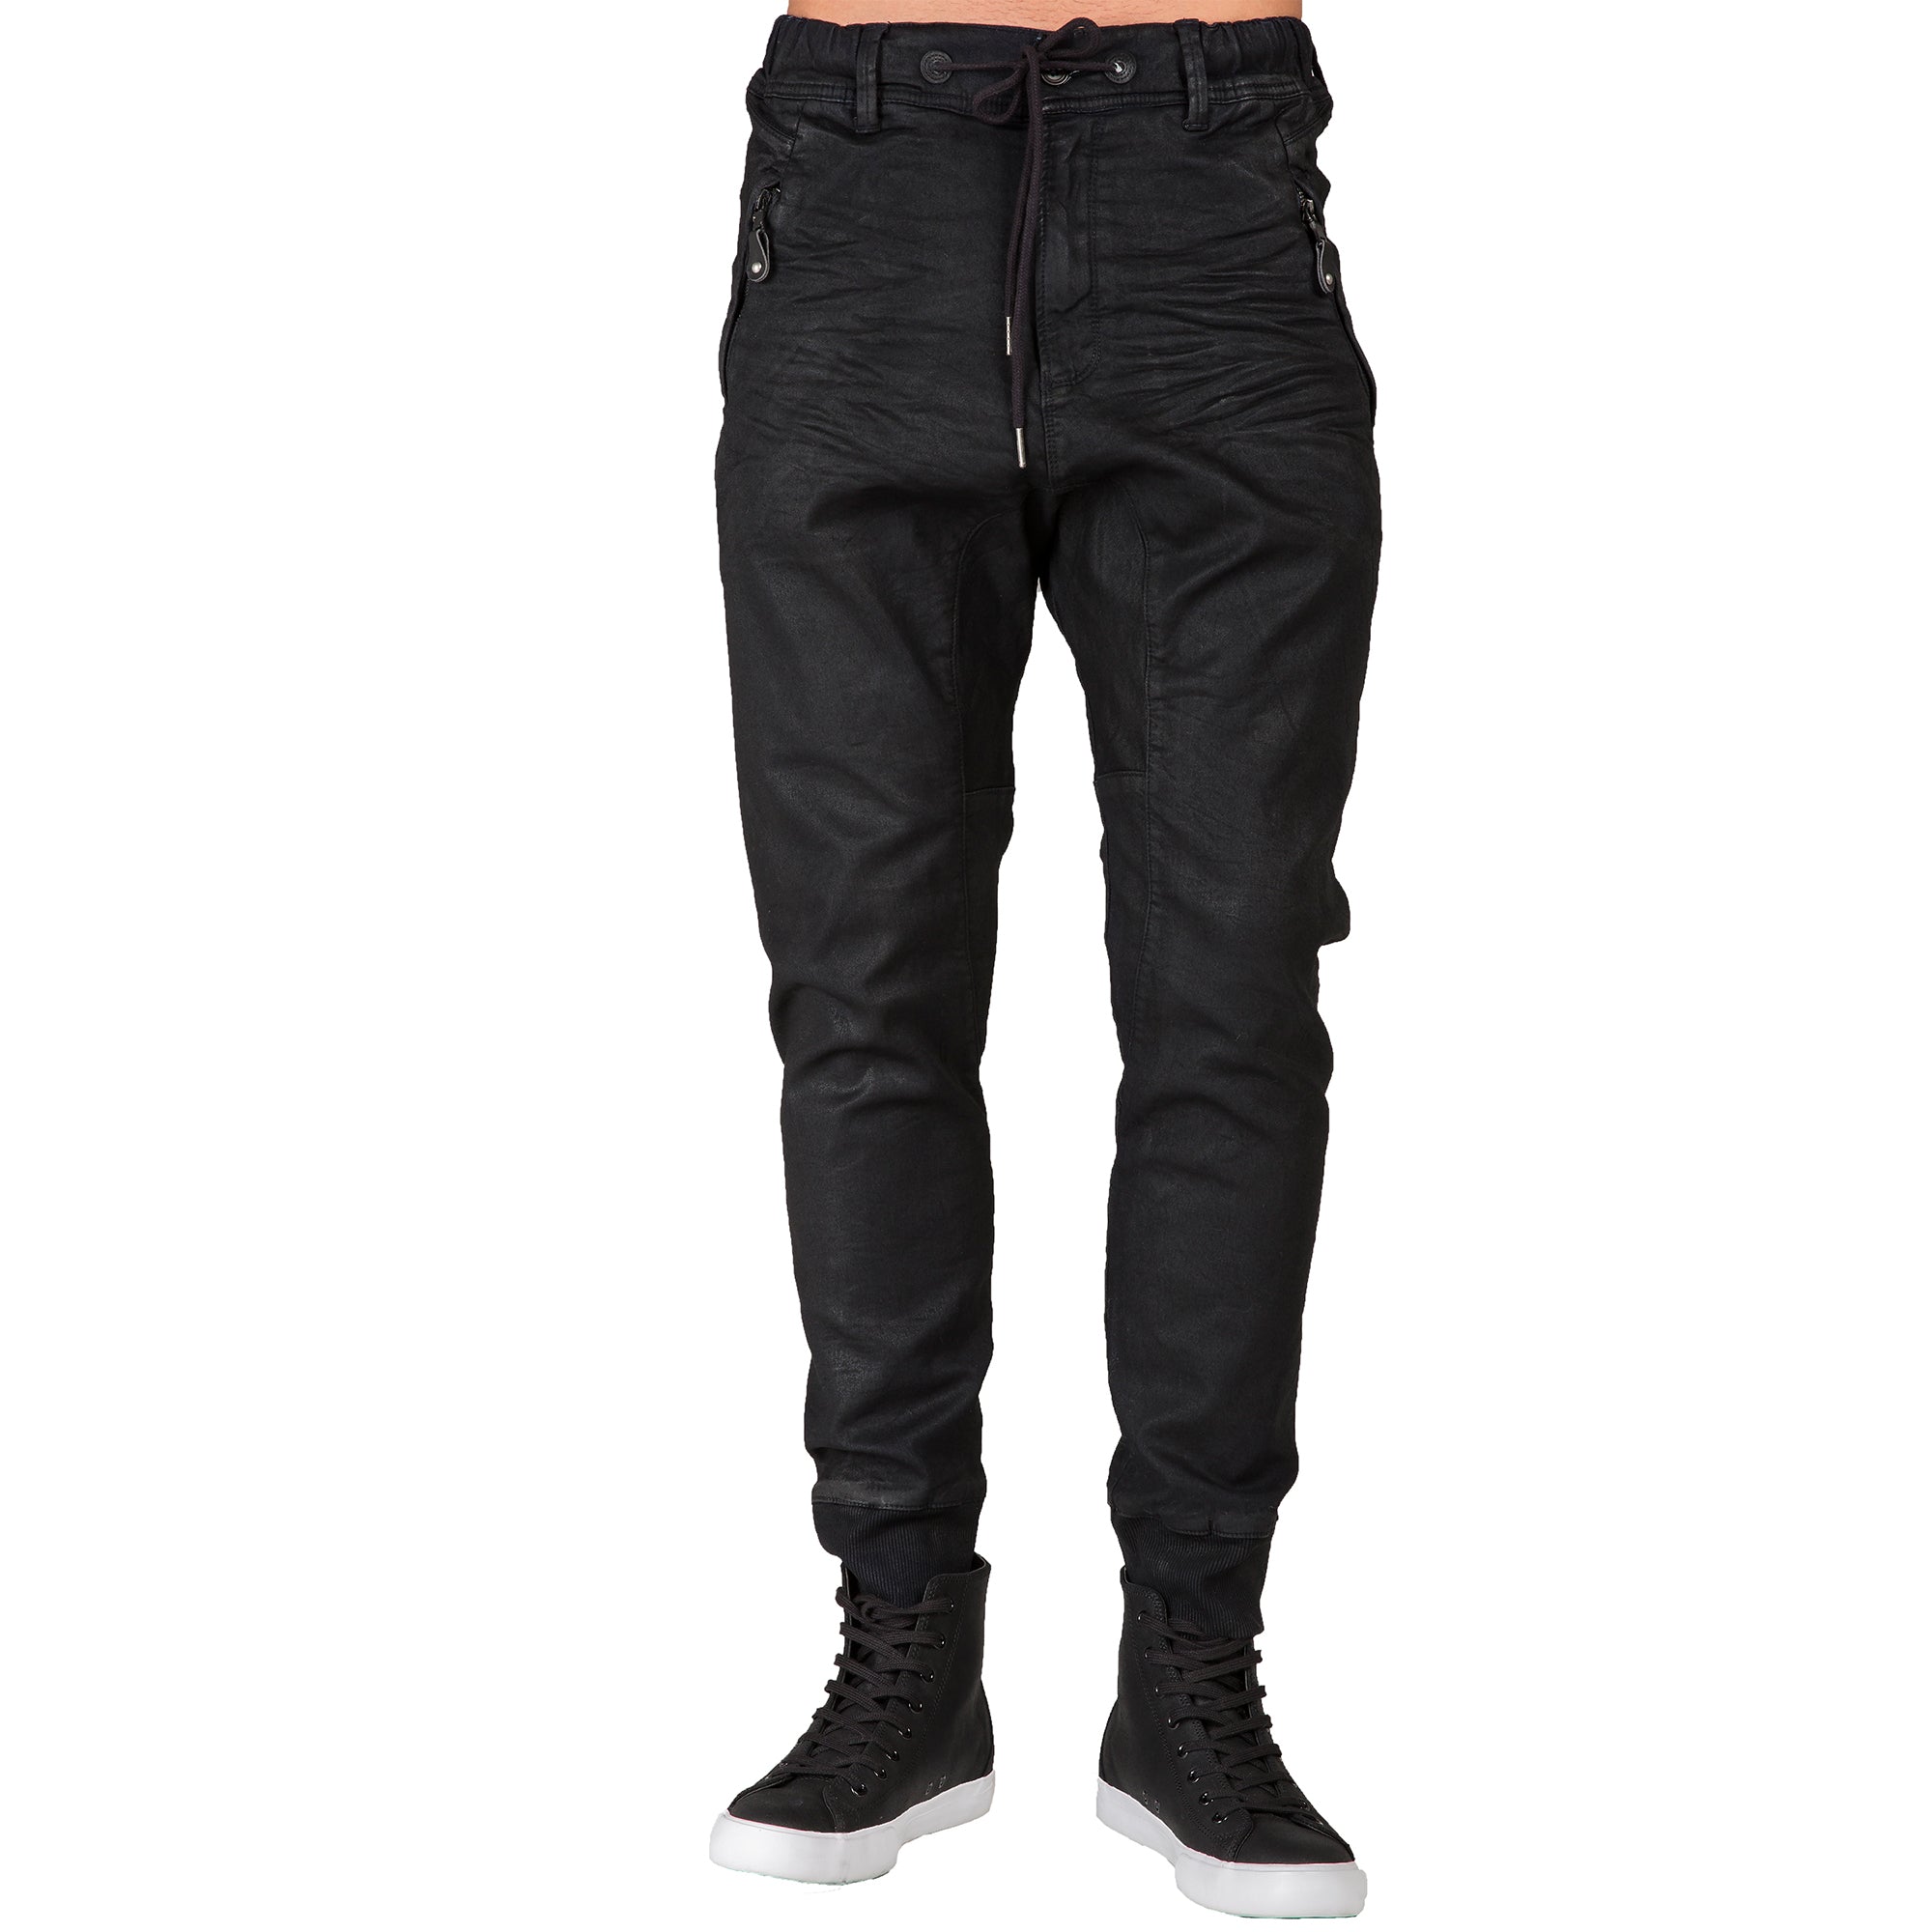 Urban Star Mens Jeans Relaxed Fit – Straight Leg India | Ubuy